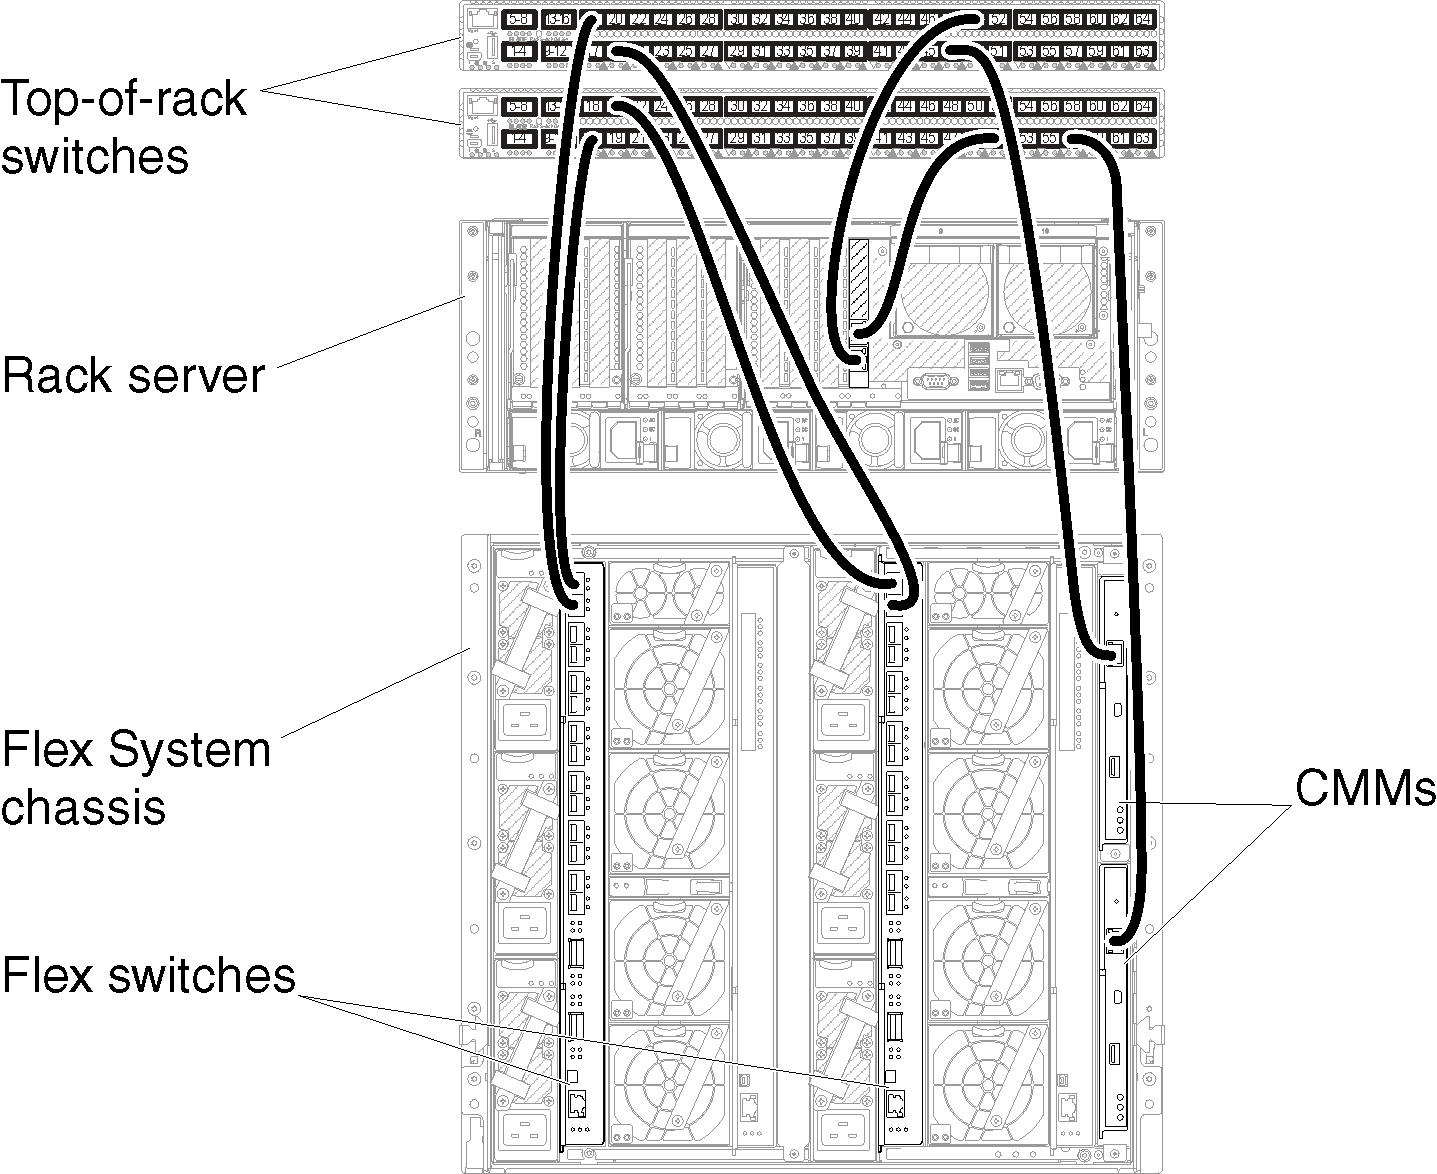 Illustrates cabling the chassis and rack servers to the top-of-rack switches for virtually separate data and management networks